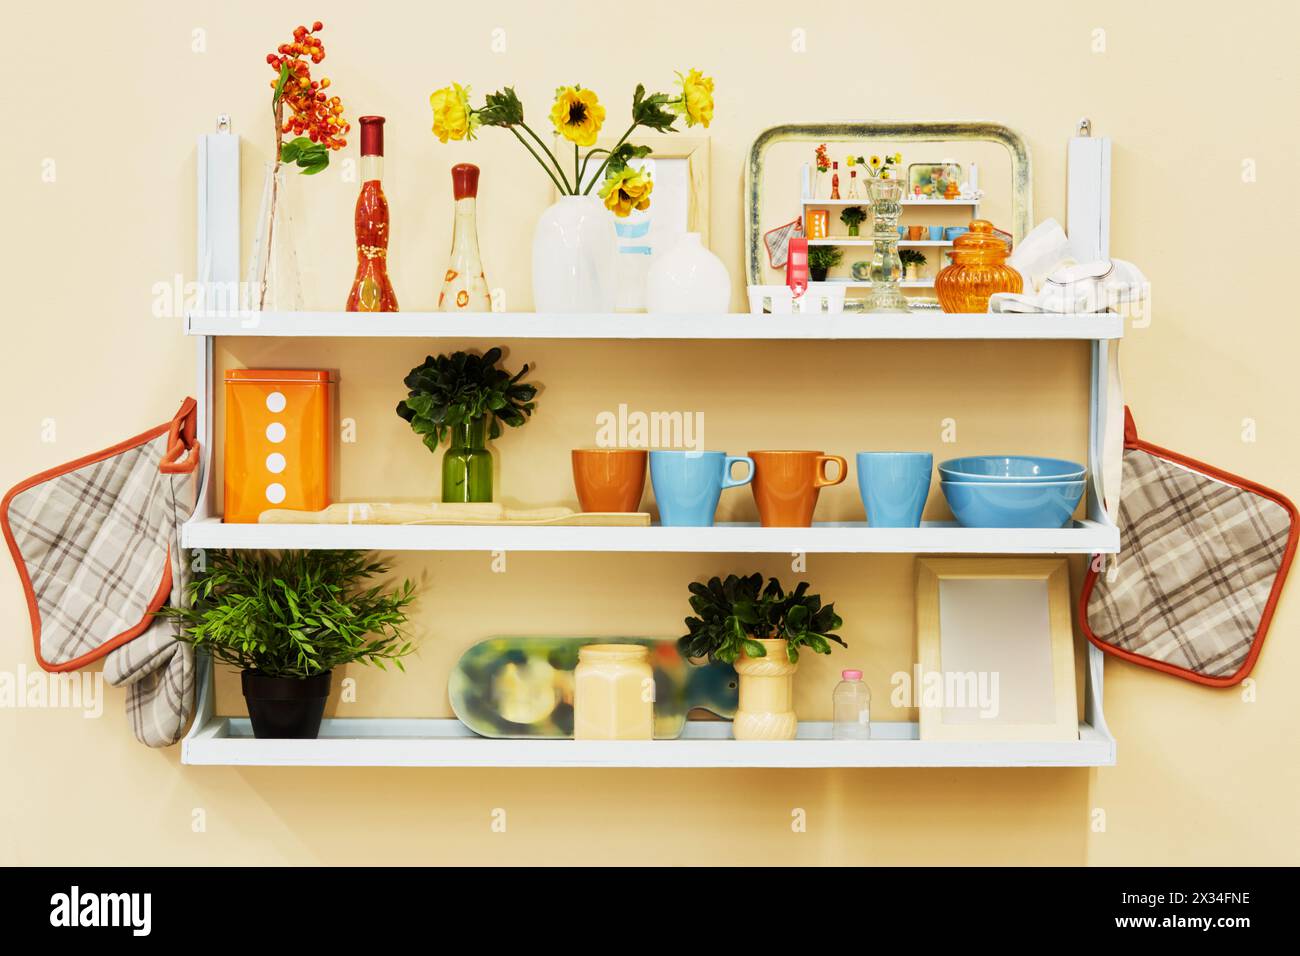 Home-made kitchen shelf with kitchenwear on the wall. Stock Photo